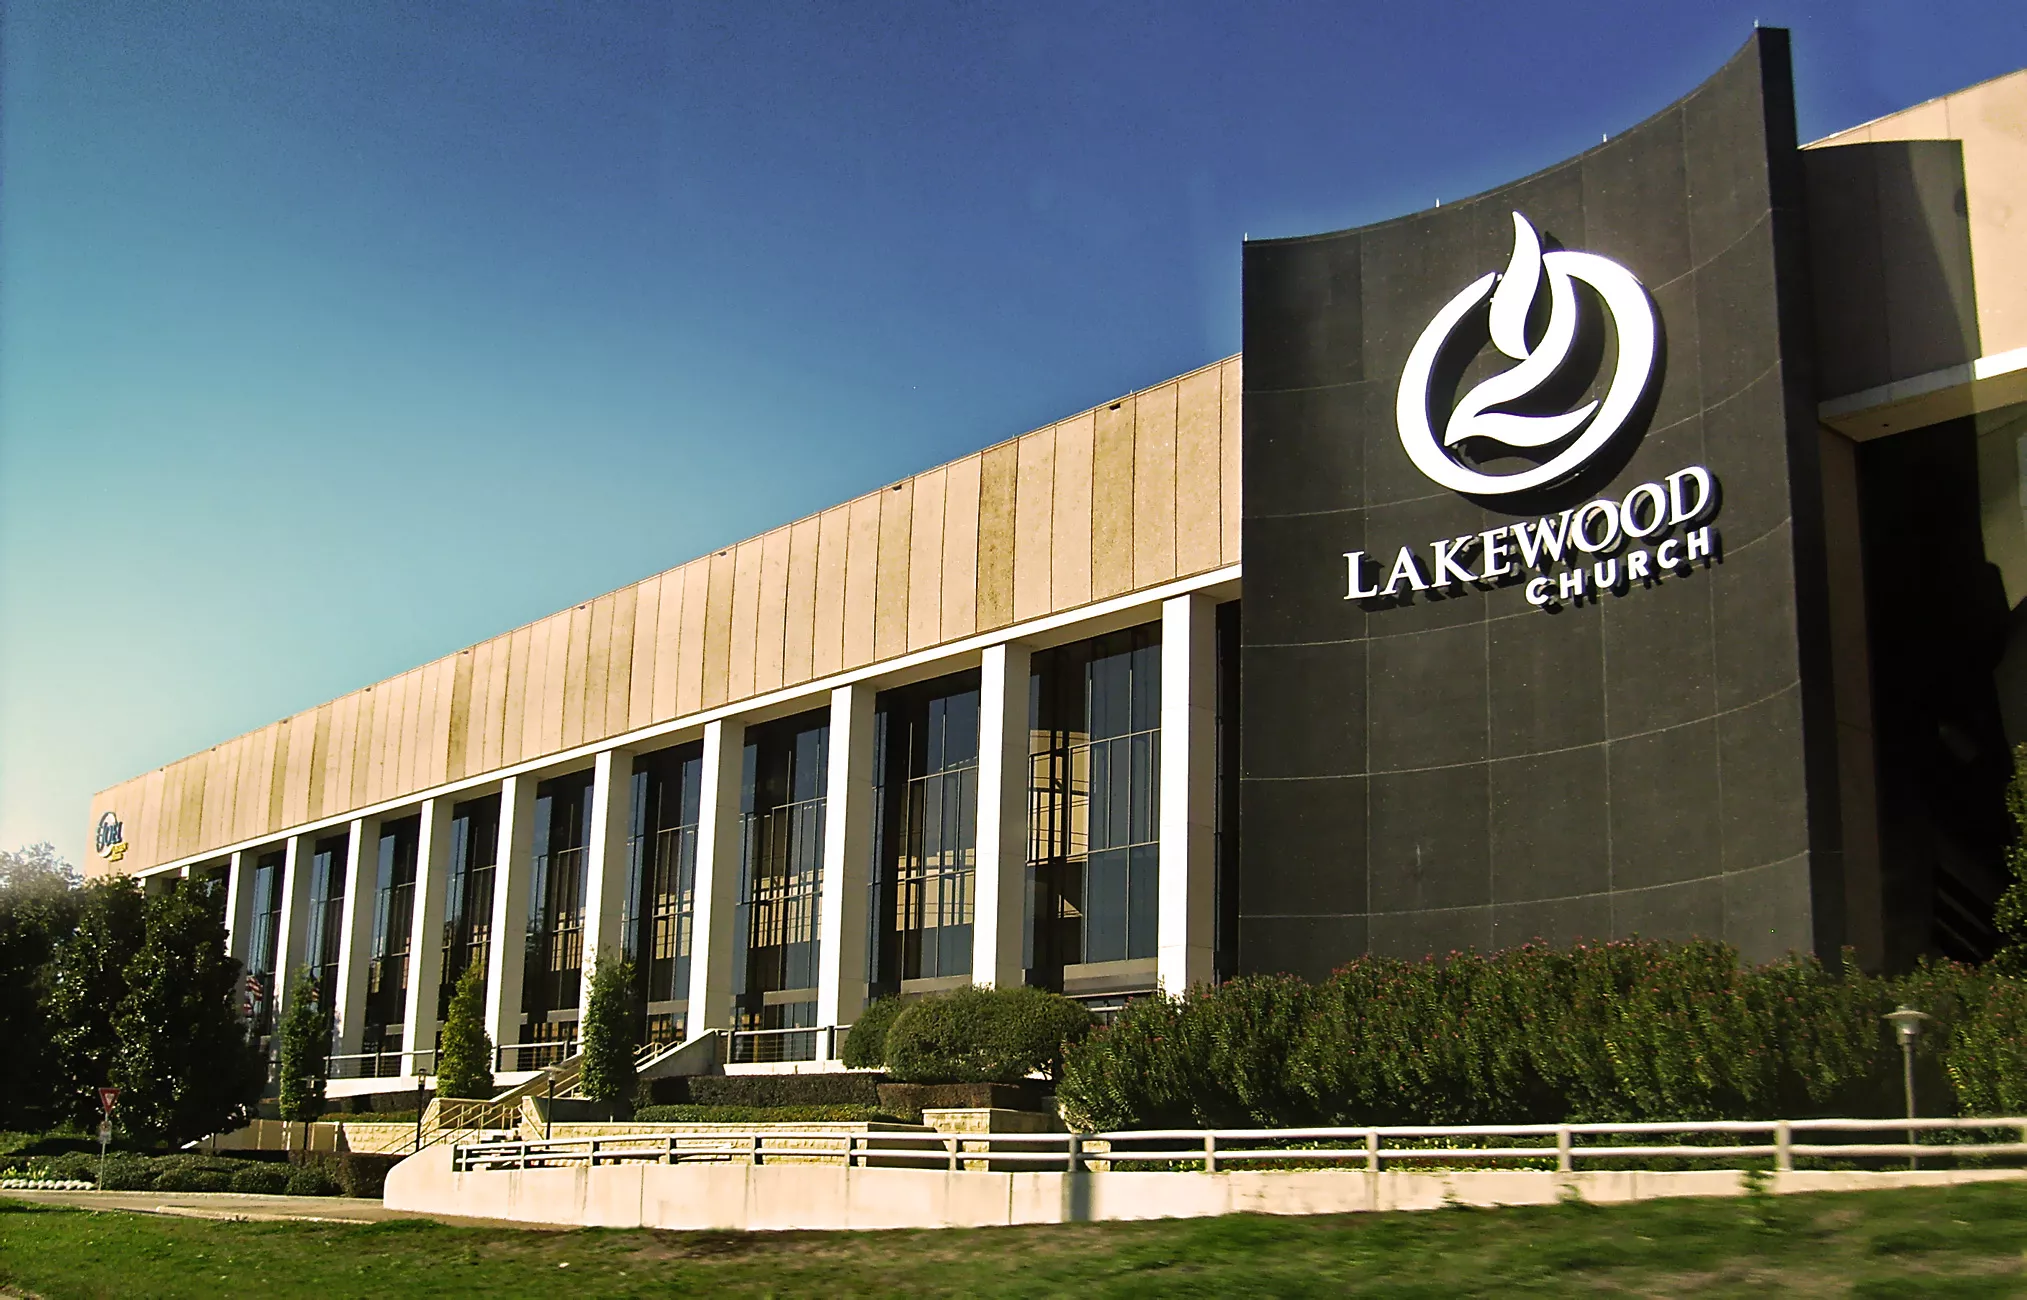 Lakewood Church in USA, North America | Architecture - Rated 3.8